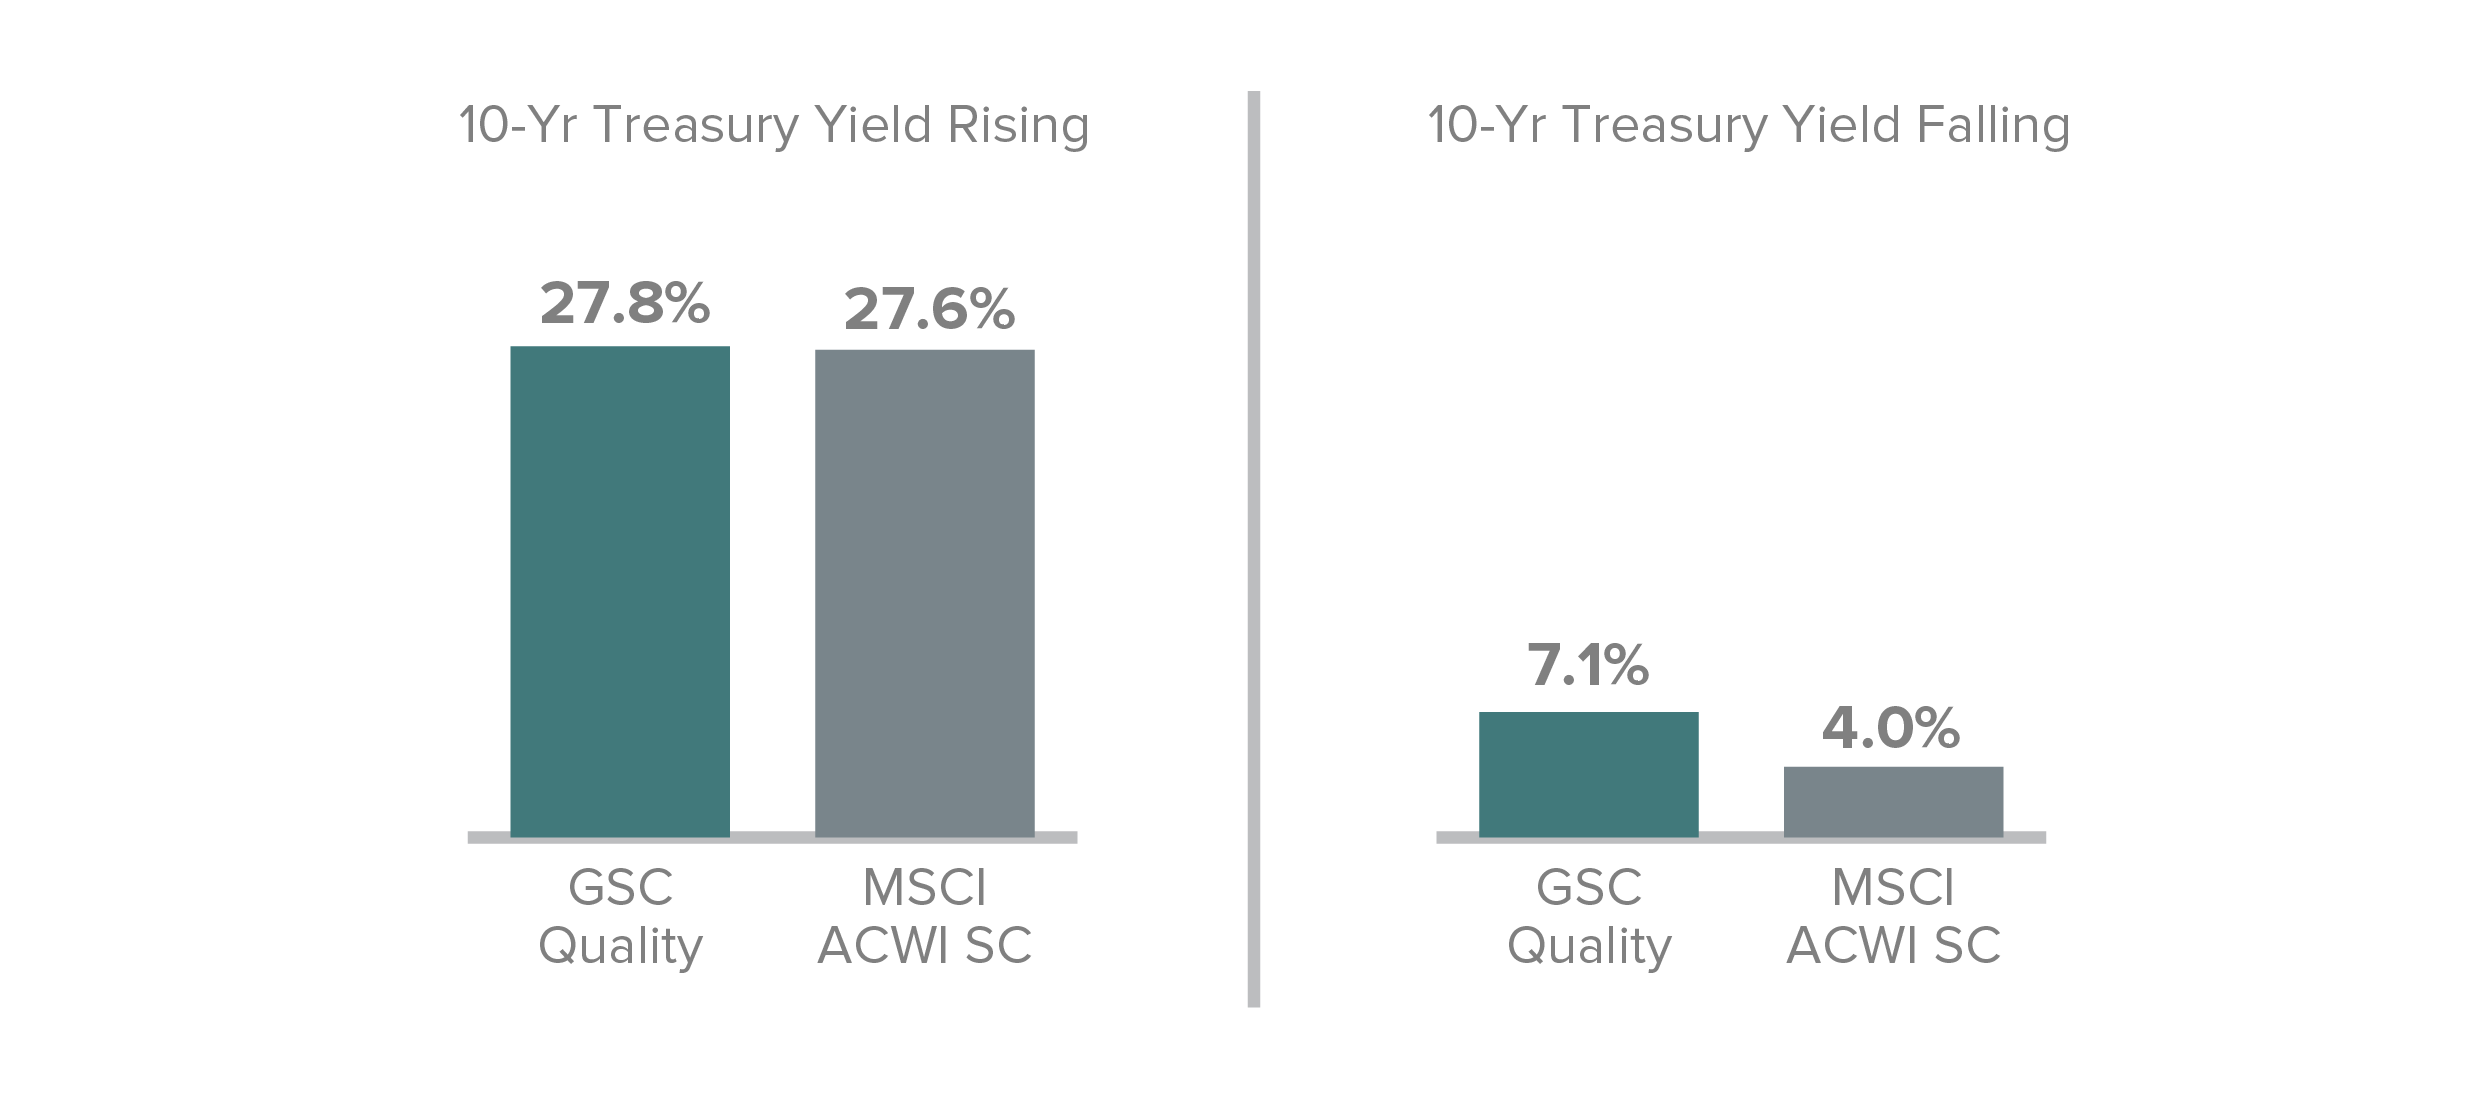 10-Yr Treasury Rising is 27.8% for GSC Quality and 27.6% for MSCI ACWI SC. 10-Year Treasury Yield Falling is 7.1% for GSC Quality and 4.0% for MSCI ACWI SC